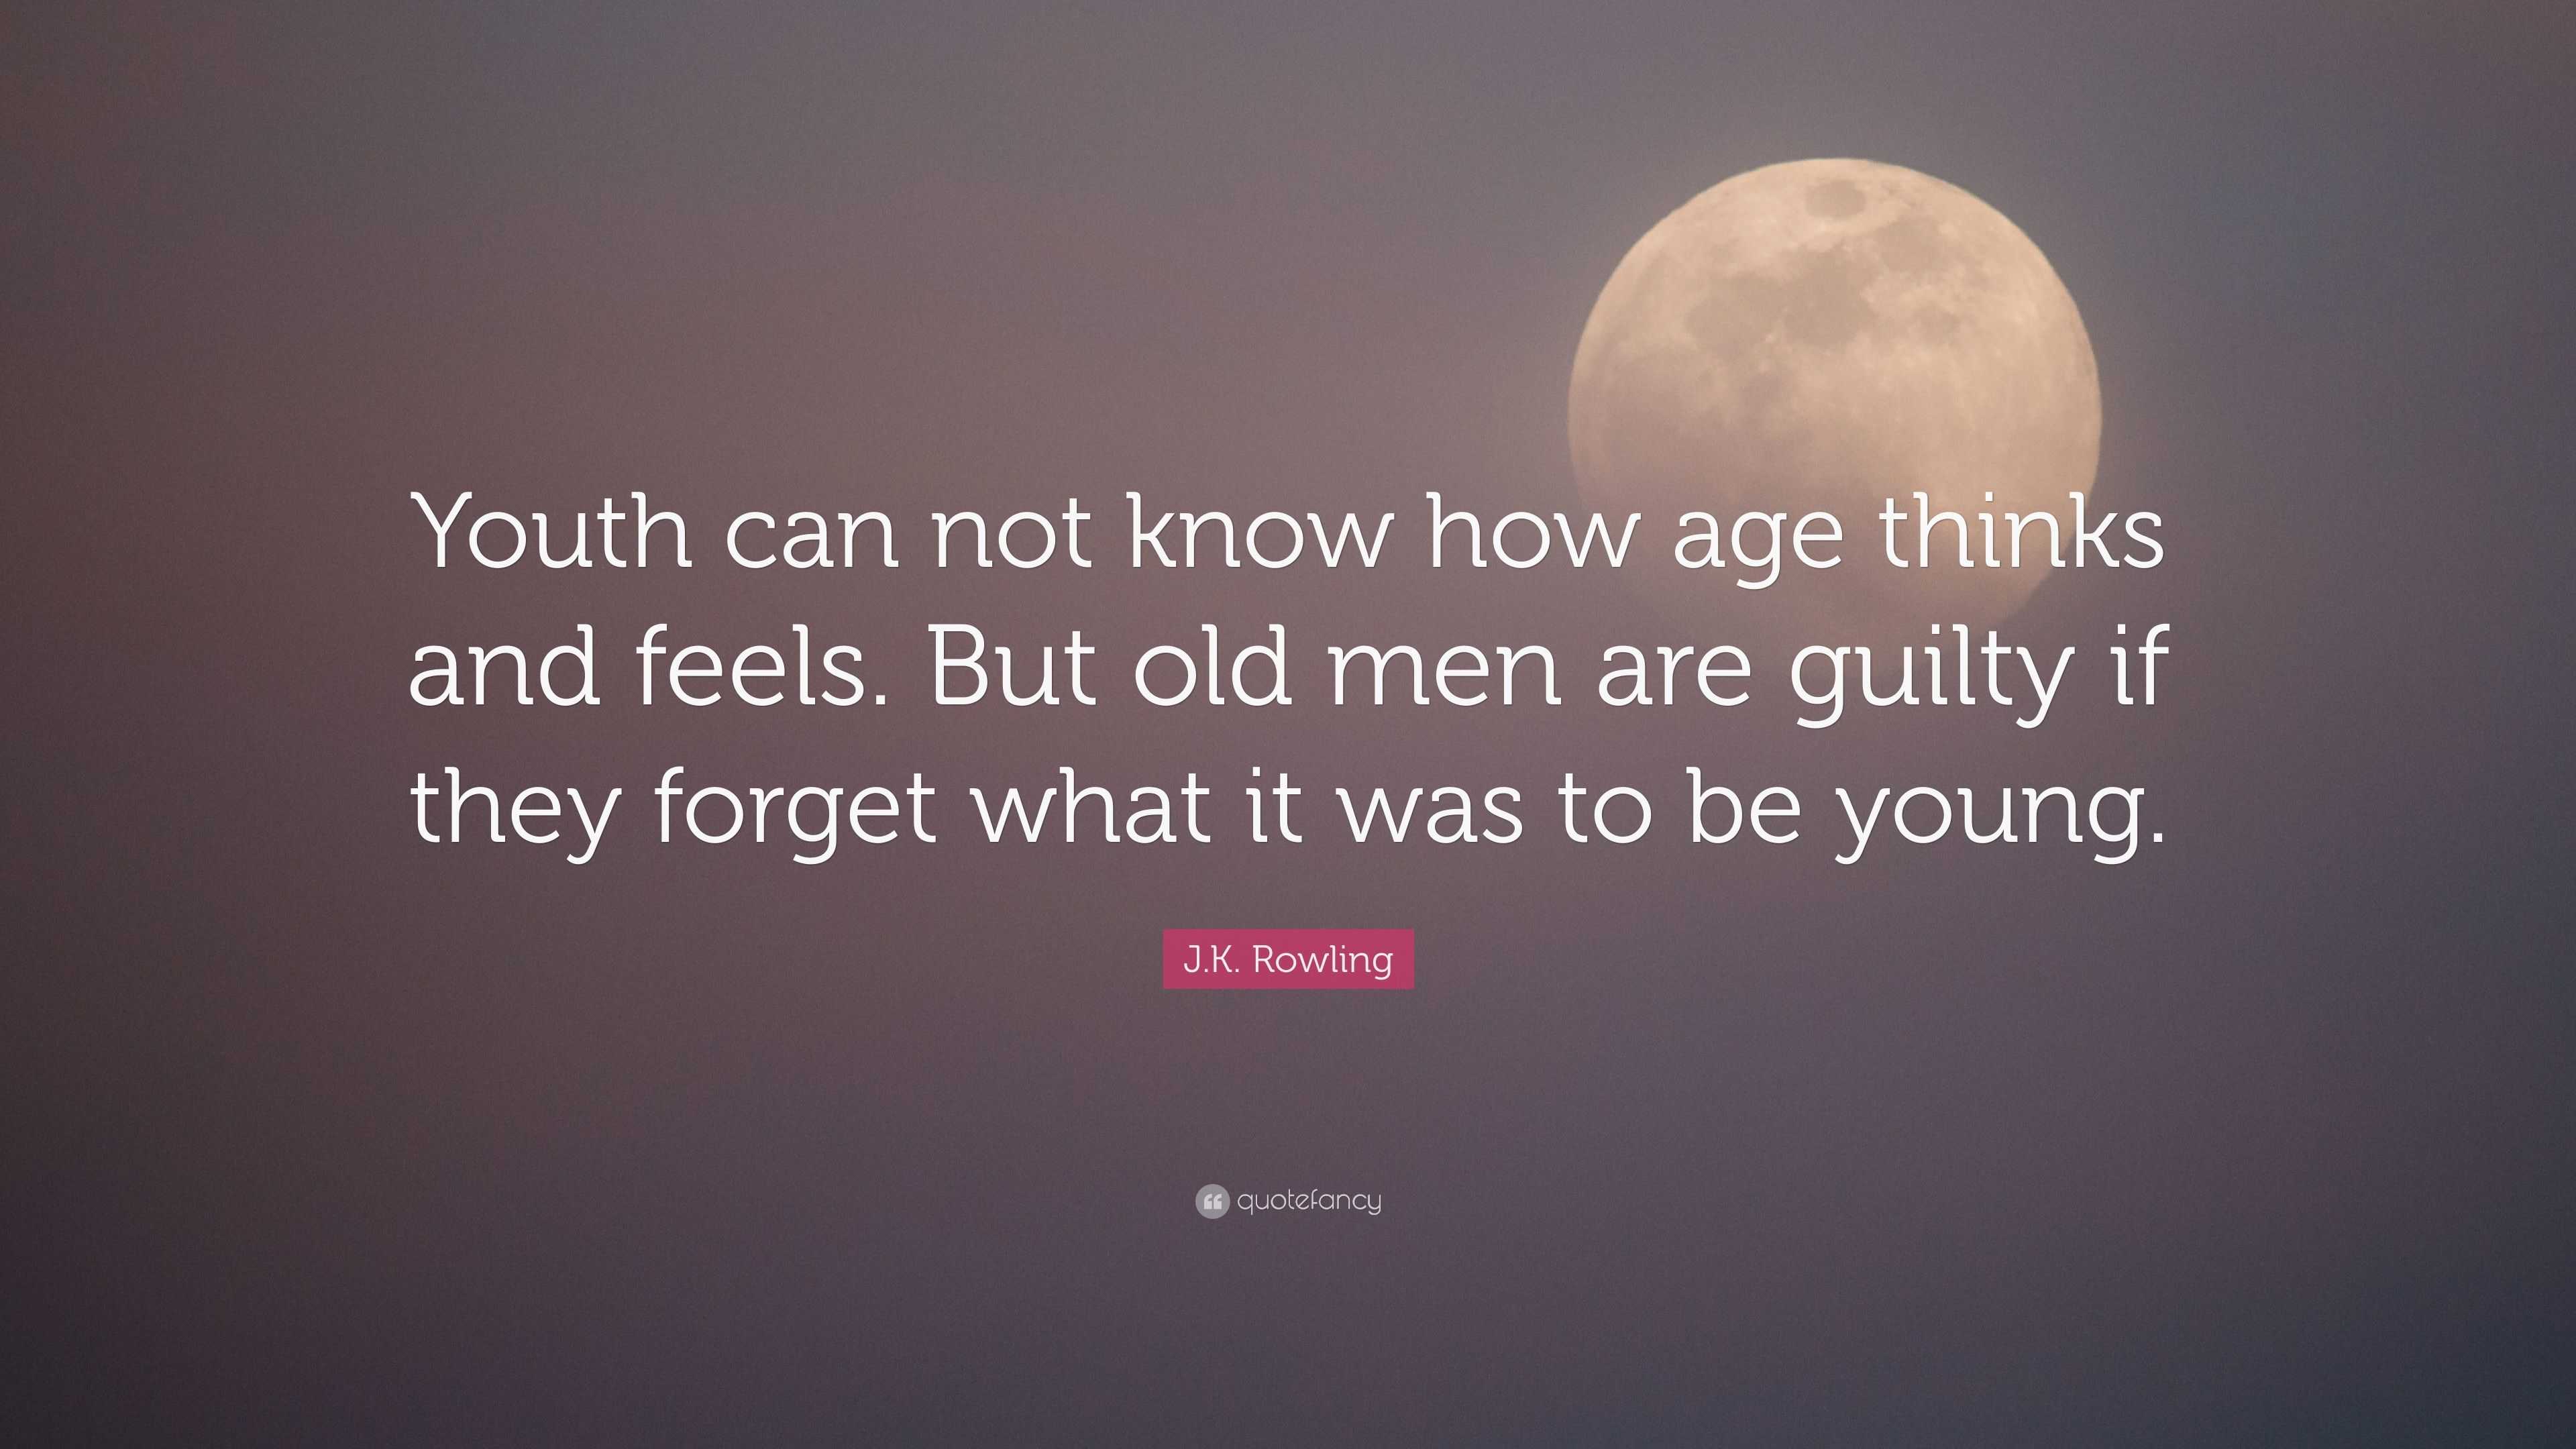 “If youth knew; if age could.”